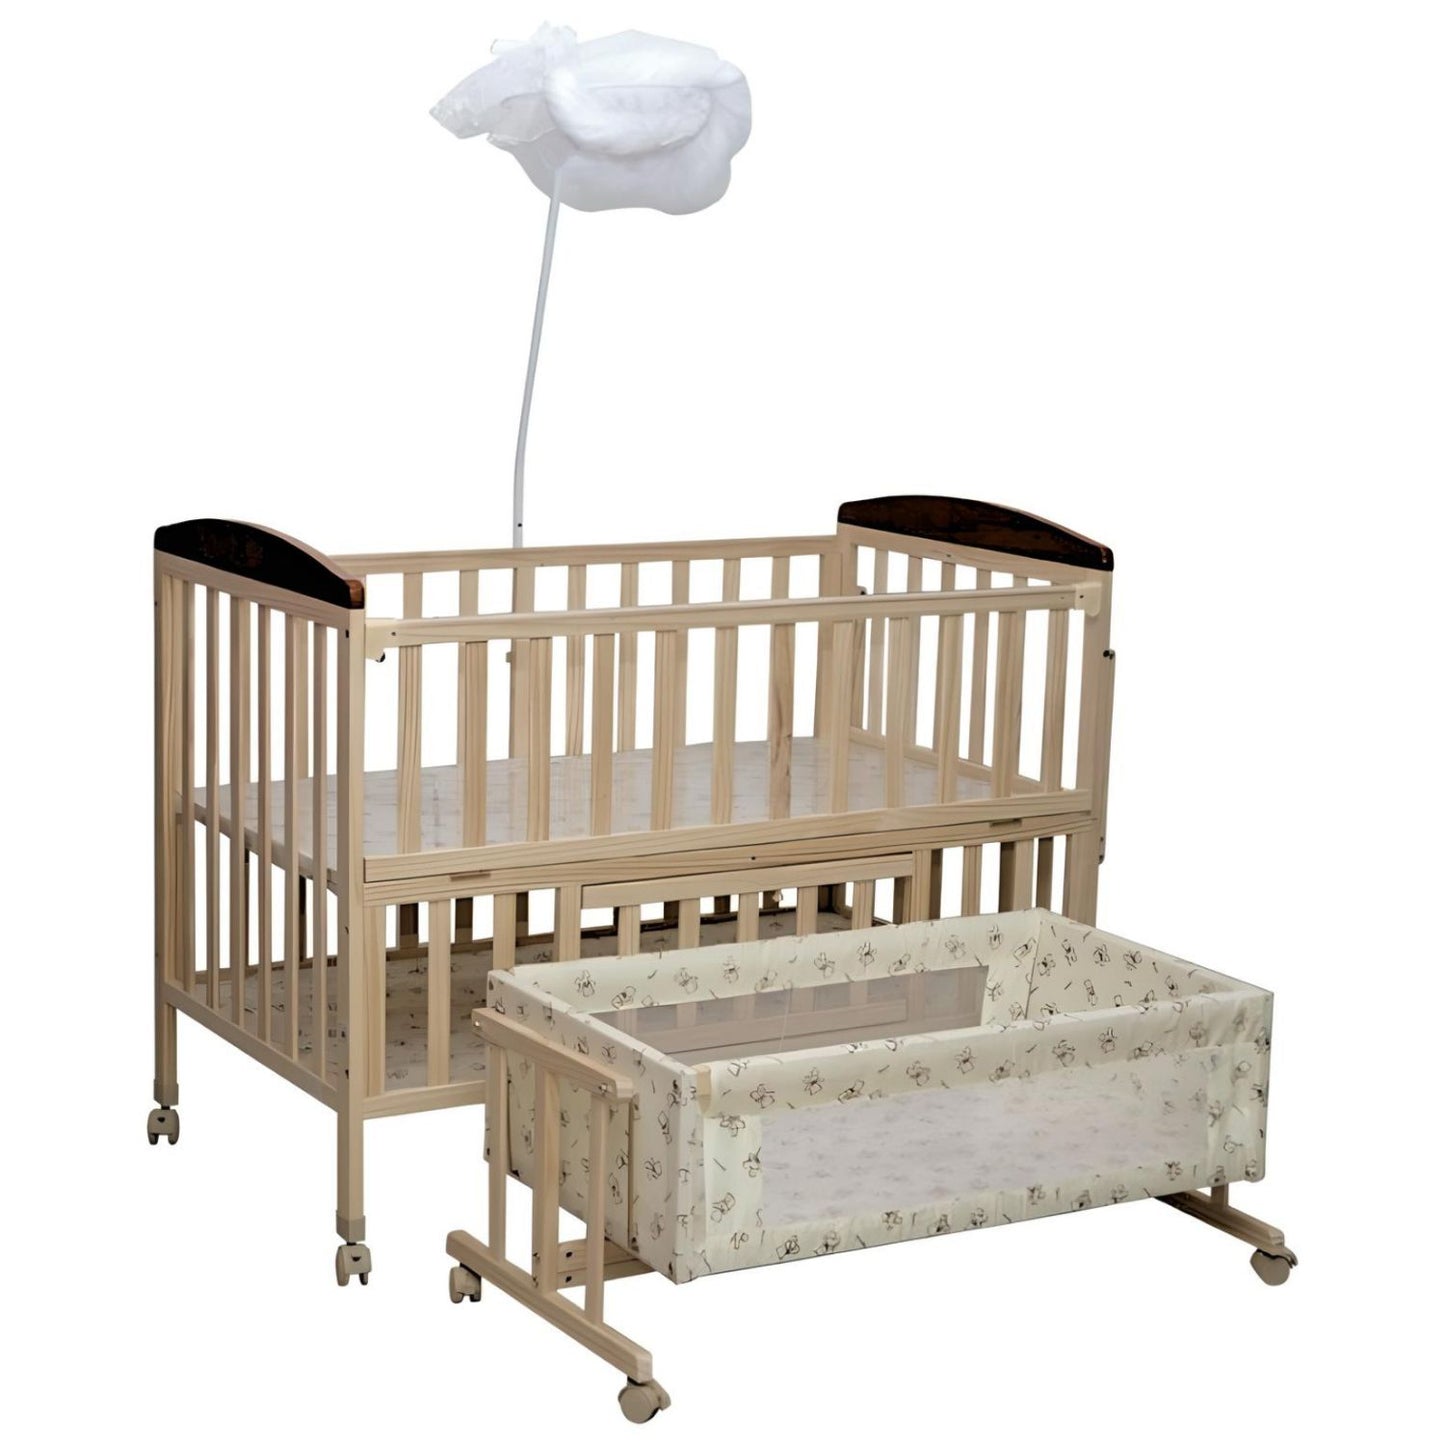 MM TOYS Multi-Functional Convertible Baby Wooden Bed with Storage & Mosquito Net - Cream